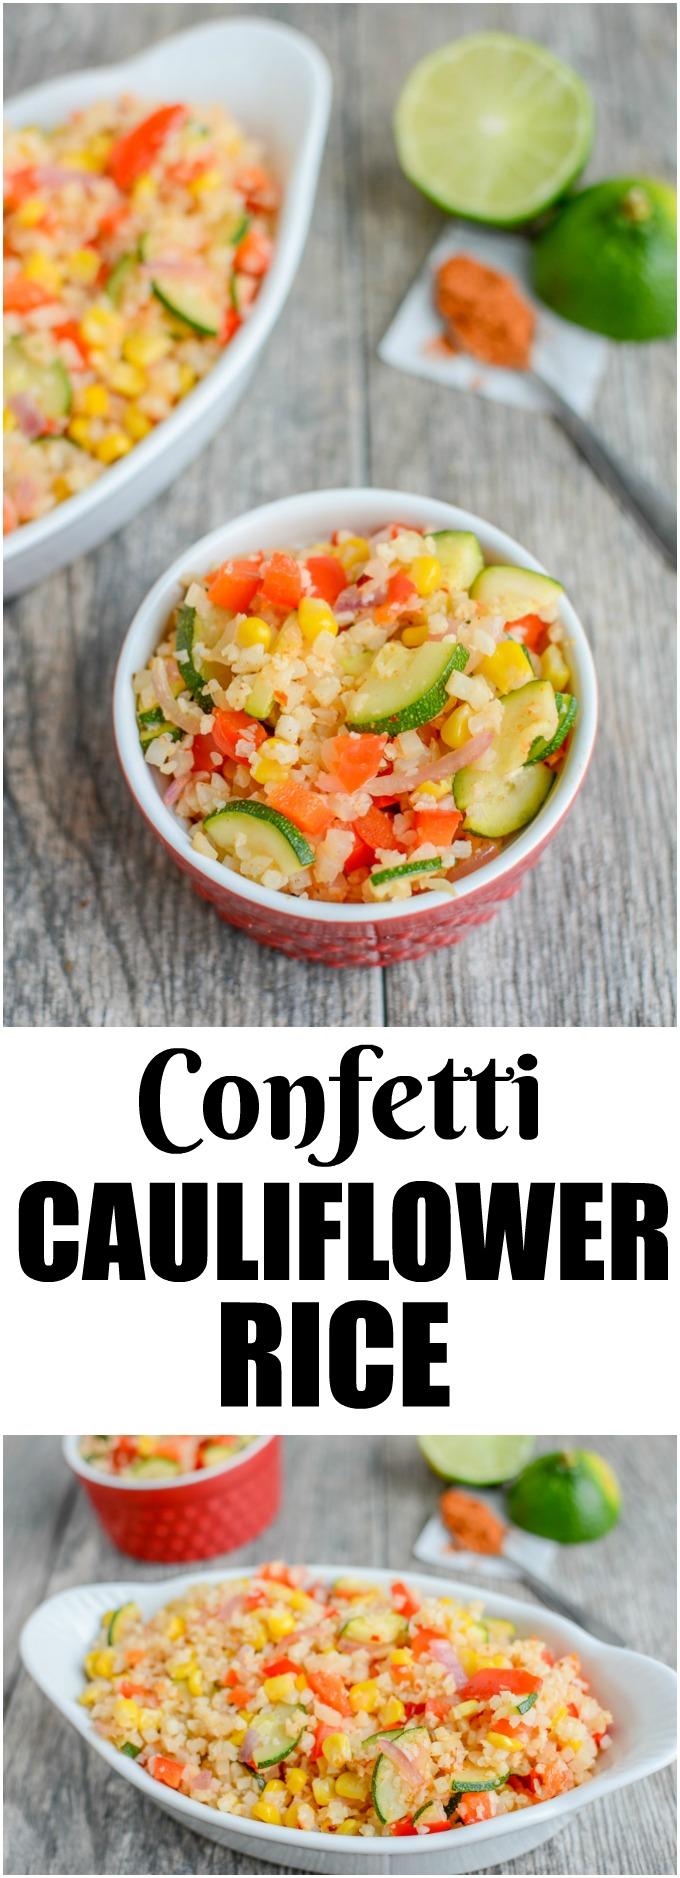 This vegan Confetti Cauliflower Rice is a healthy, gluten-free recipe seasoned with chili and lime. Serve it as a side dish or add some protein to turn it into a main dish for lunch or dinner.